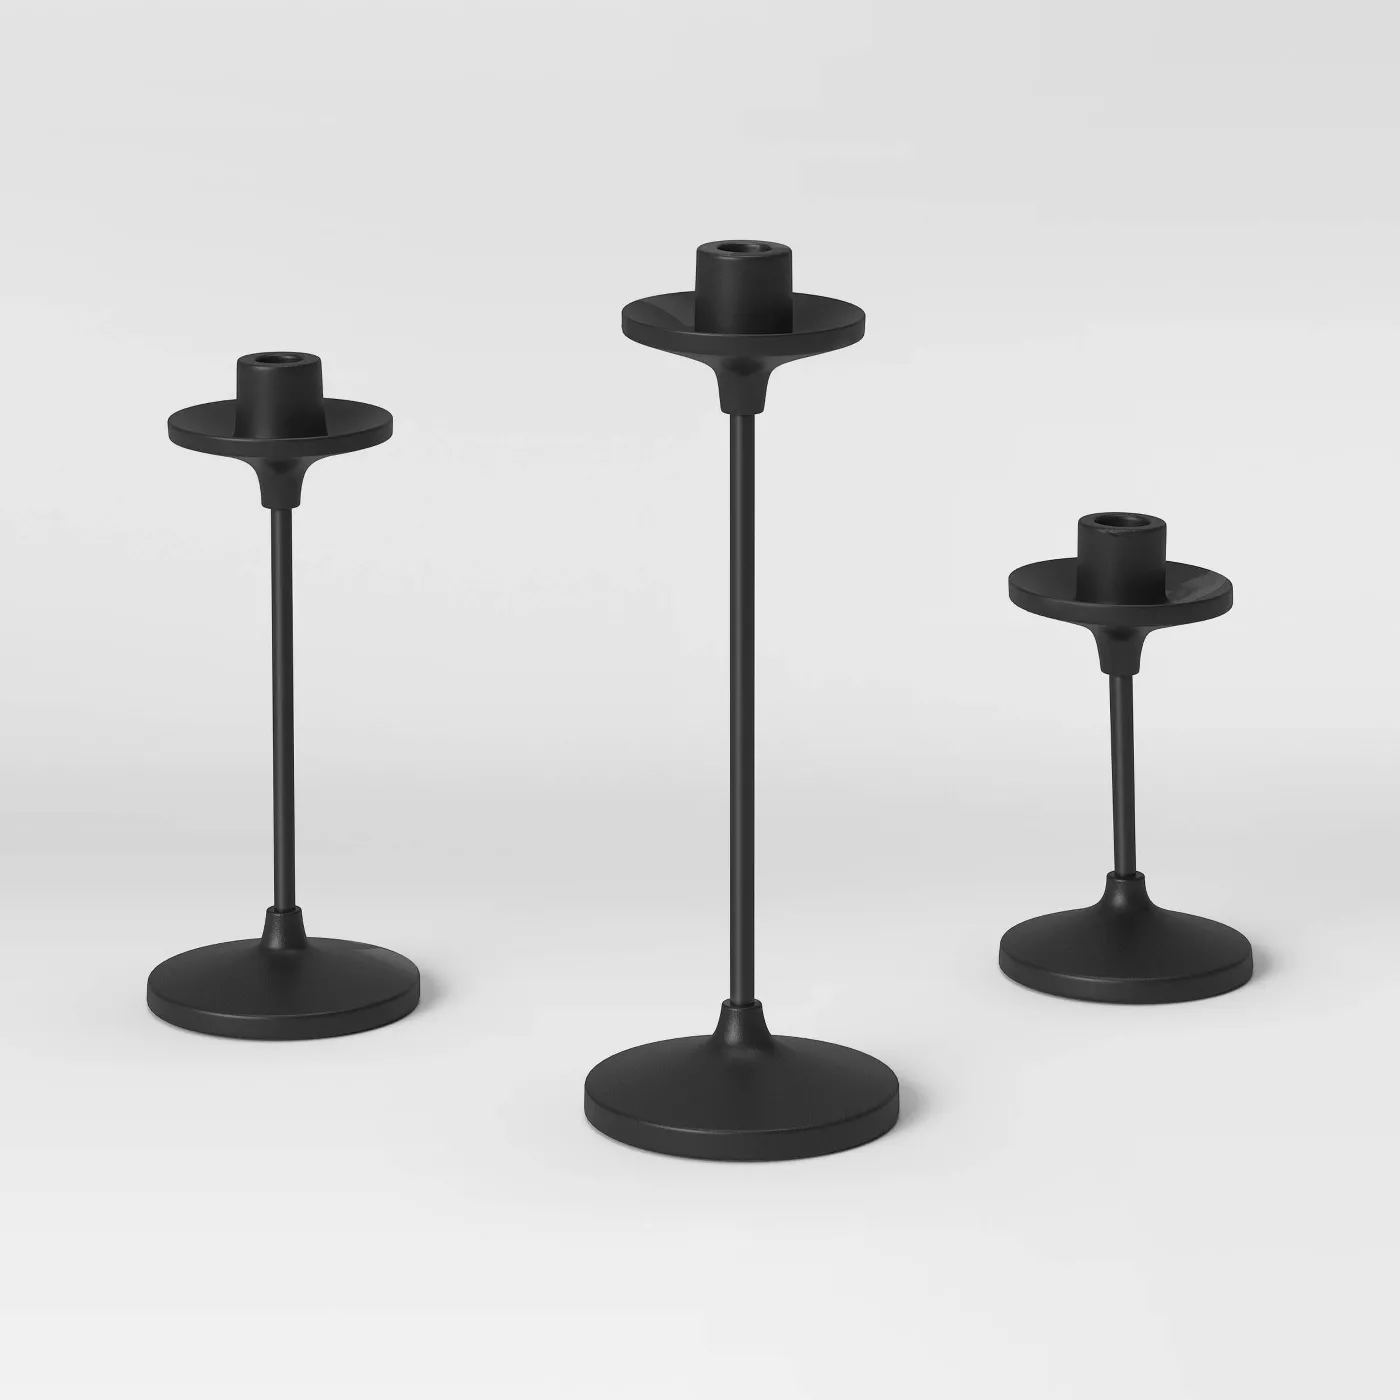 11"x4" Set of 3 Tapers Metal Candle Holder Black - Threshold™ - image 1 of 12